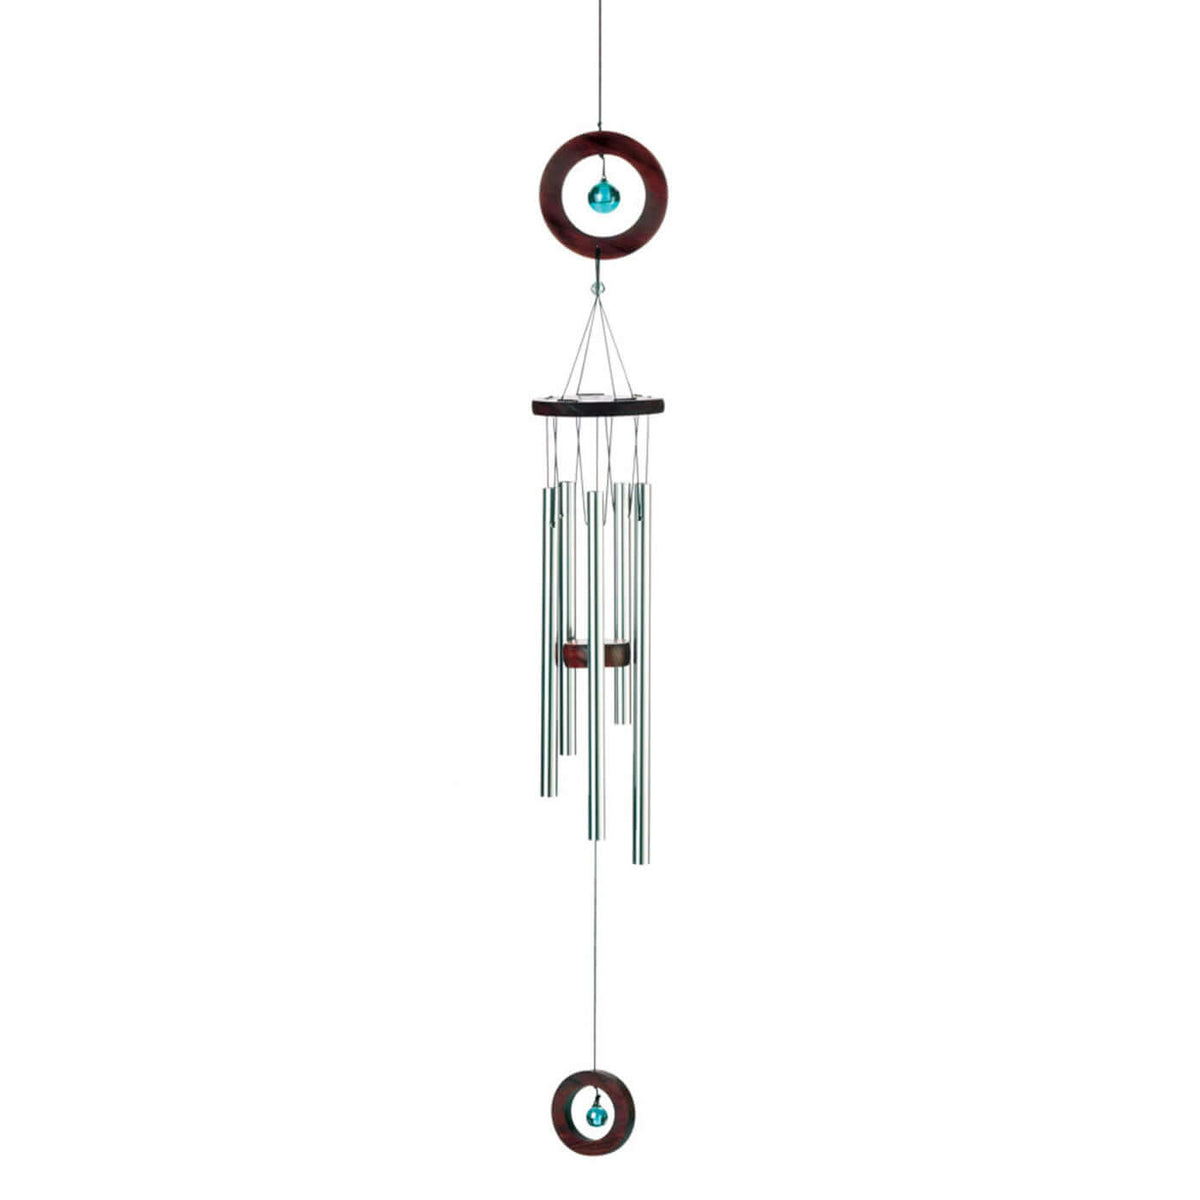 35 Inch Circle Wind Chime- The House of Awareness